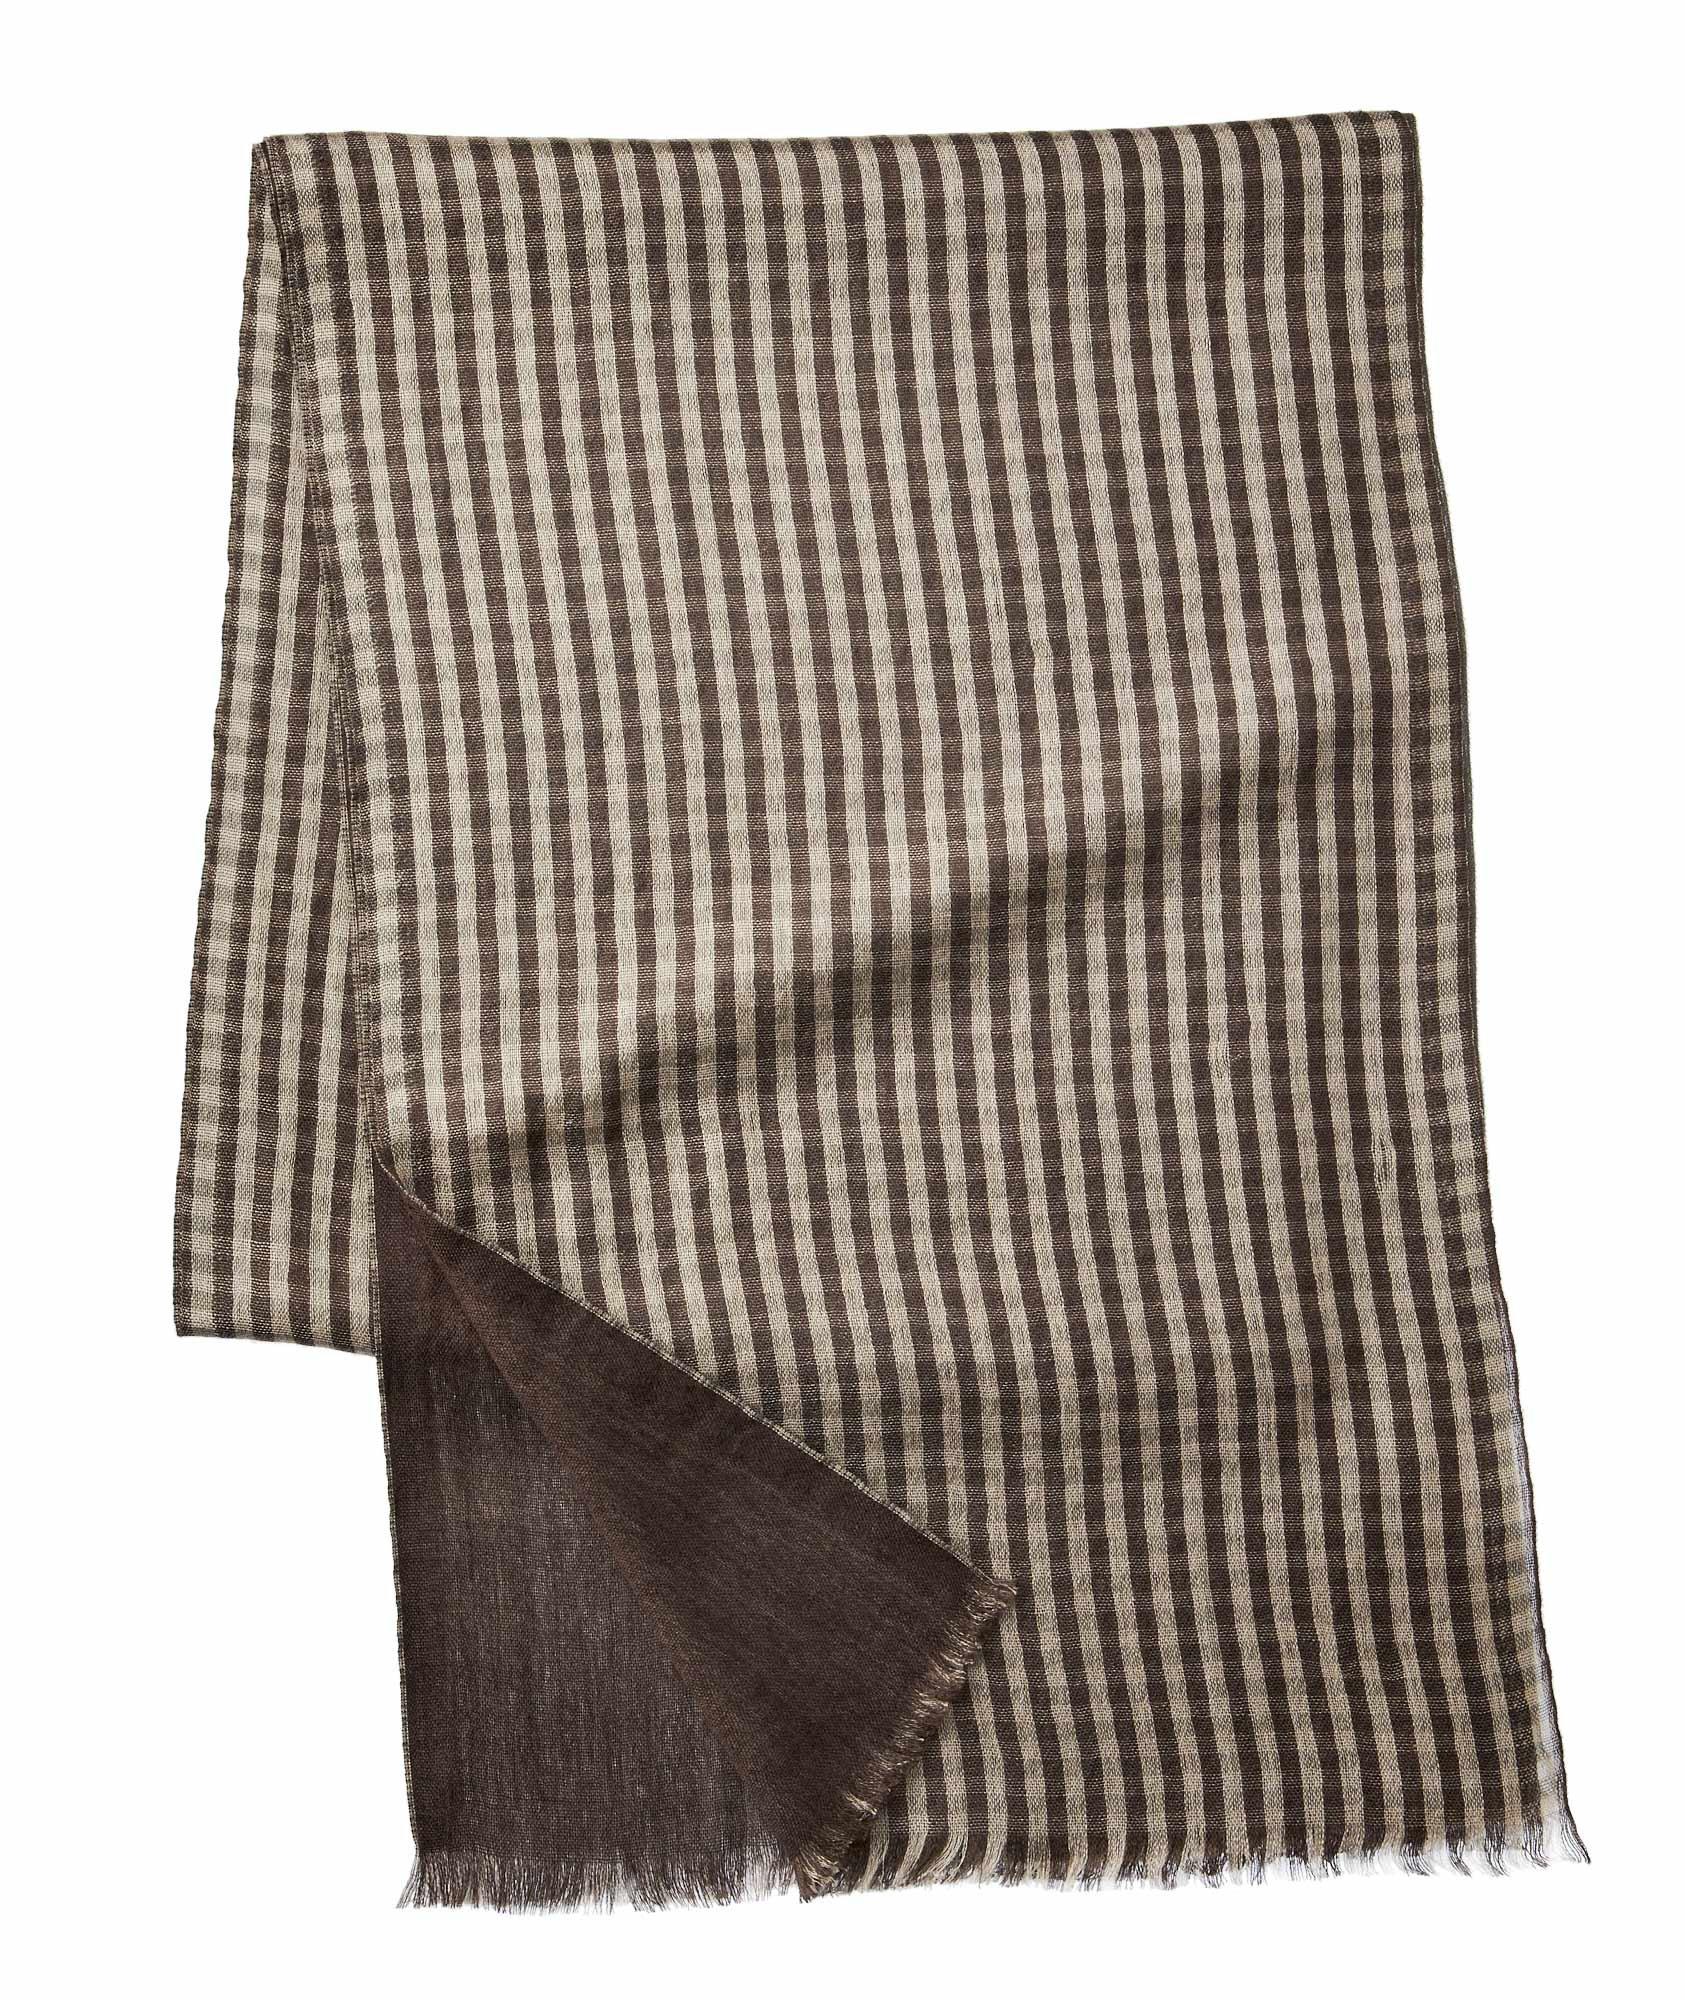 Gingham-Printed Cashmere & Silk Scarf image 0